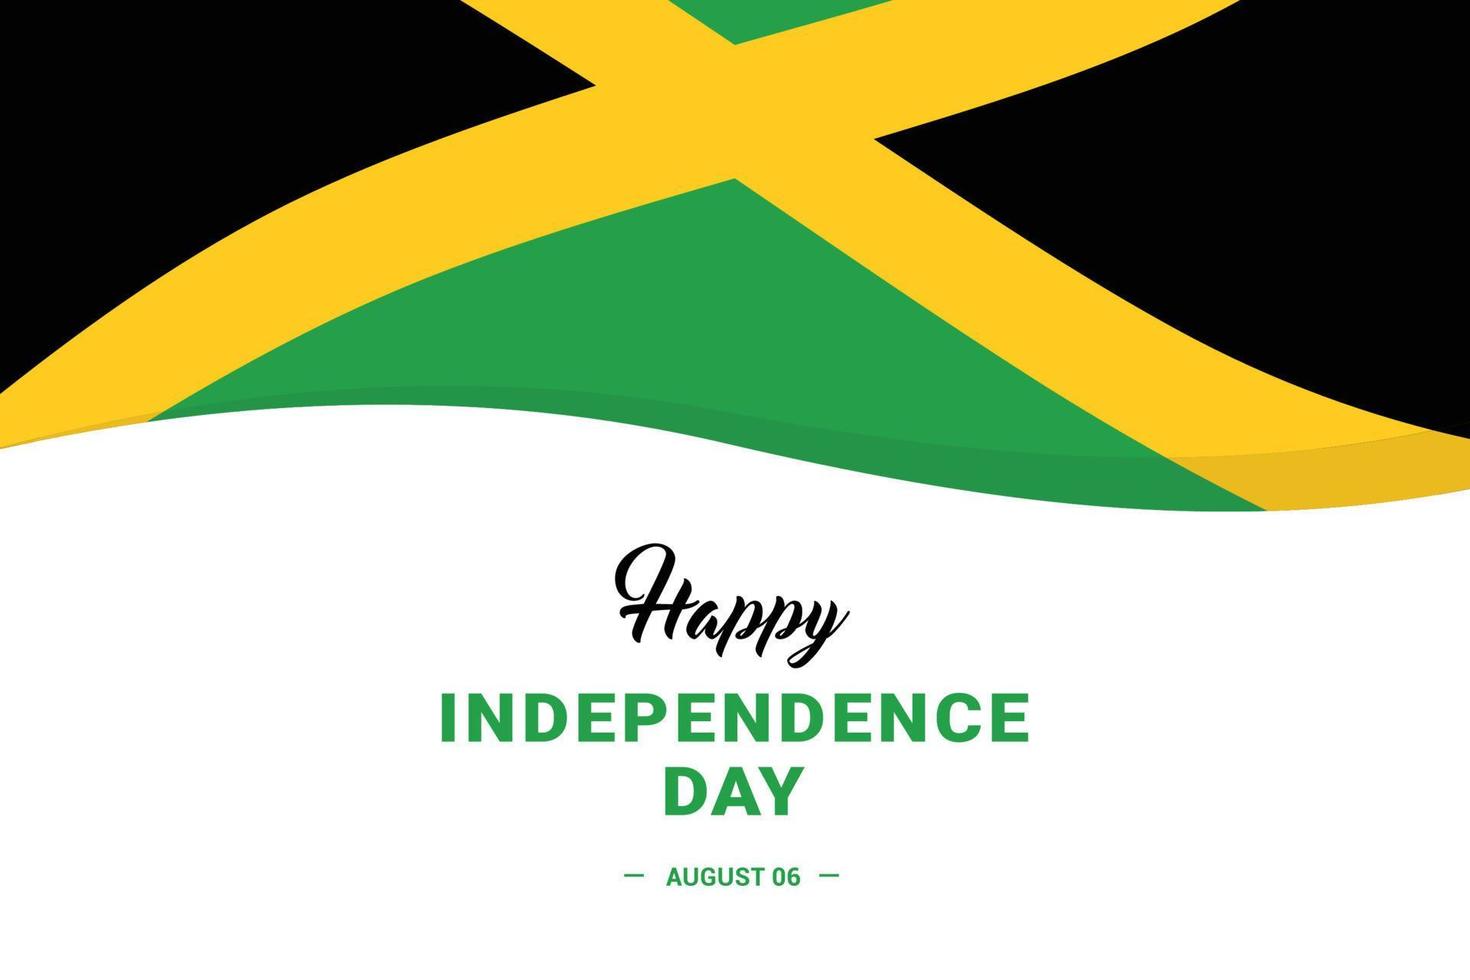 Jamaica Independence Day vector